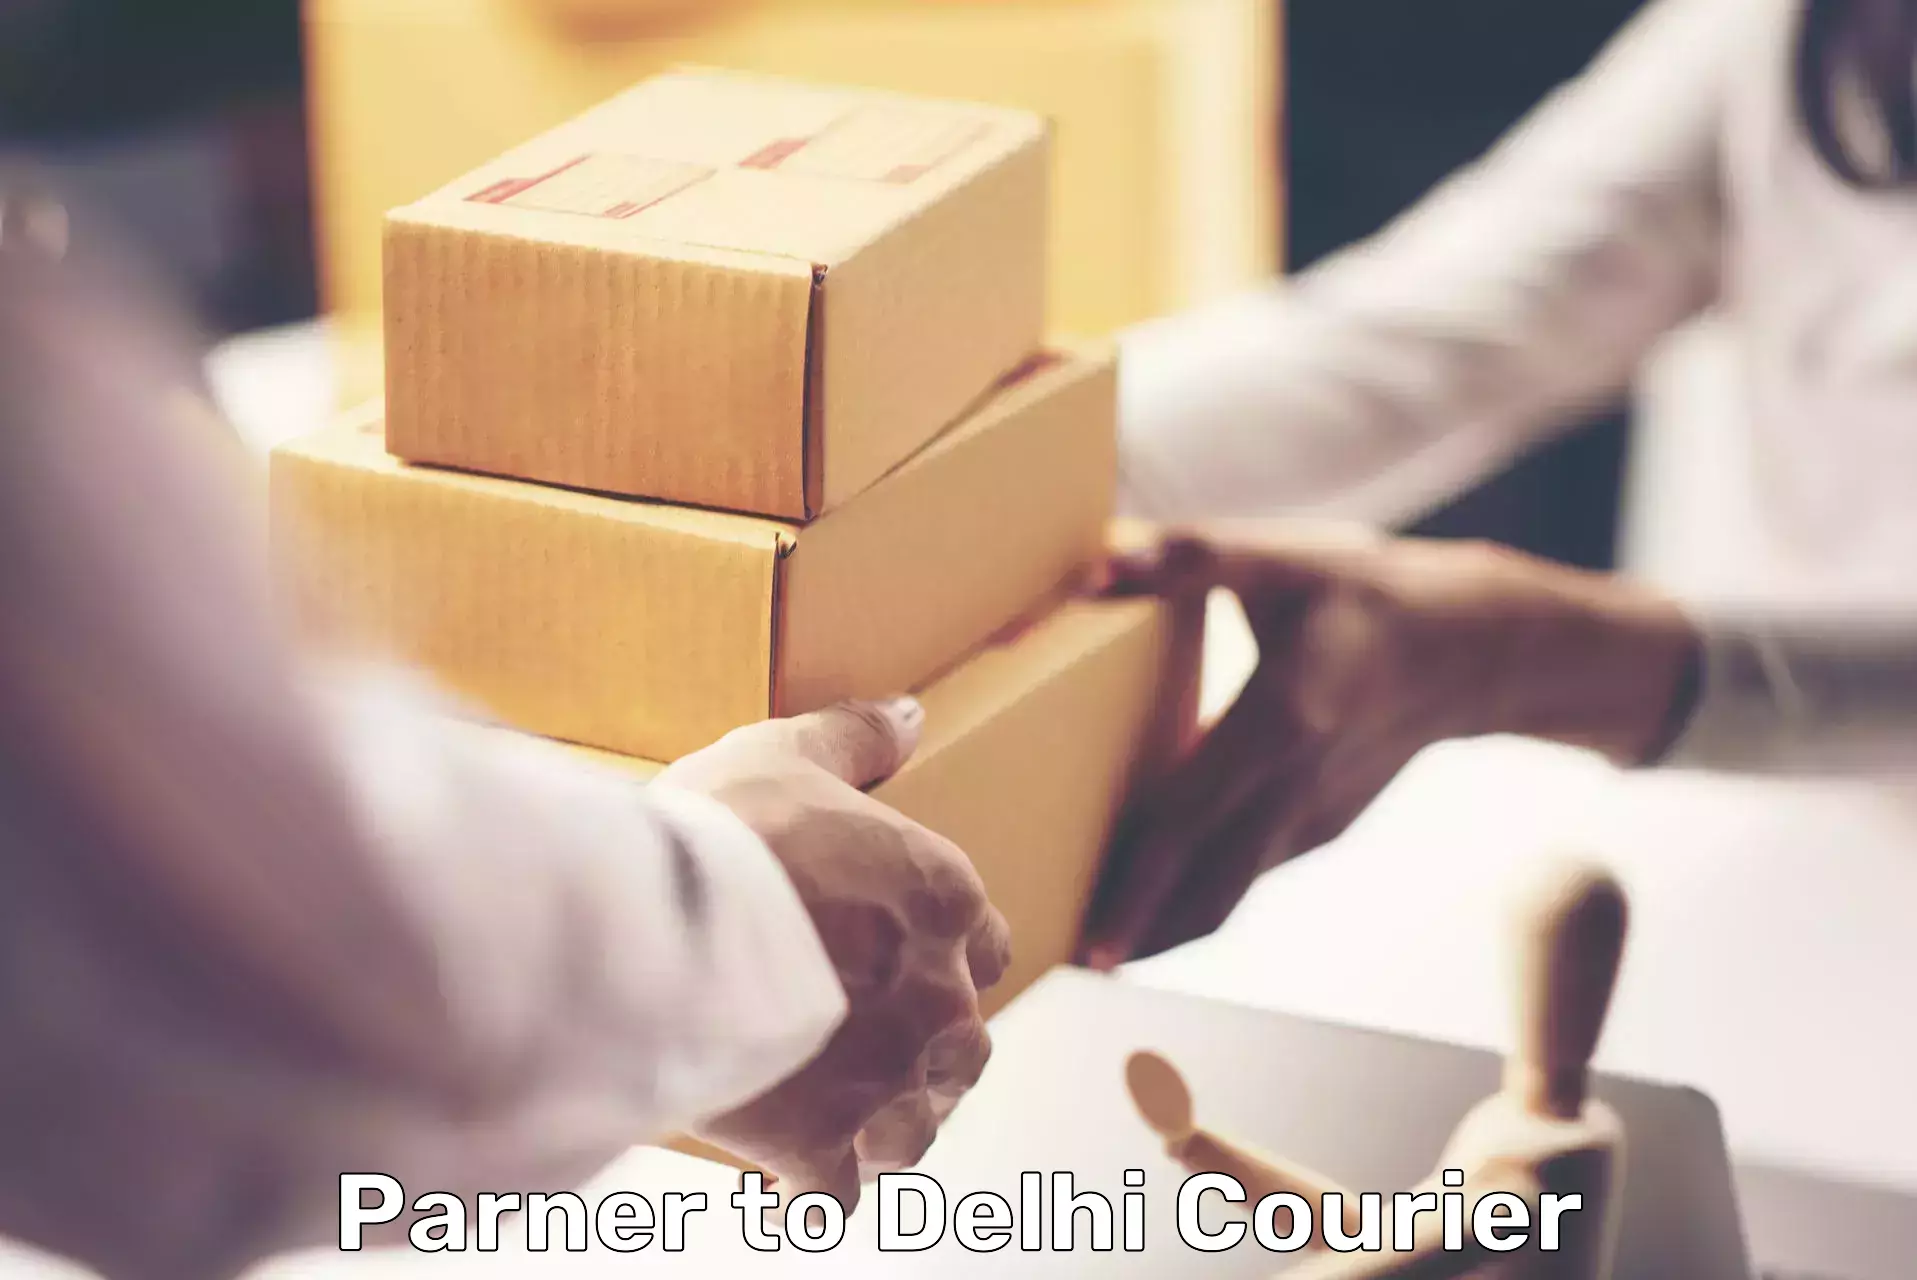 State-of-the-art courier technology Parner to Krishna Nagar